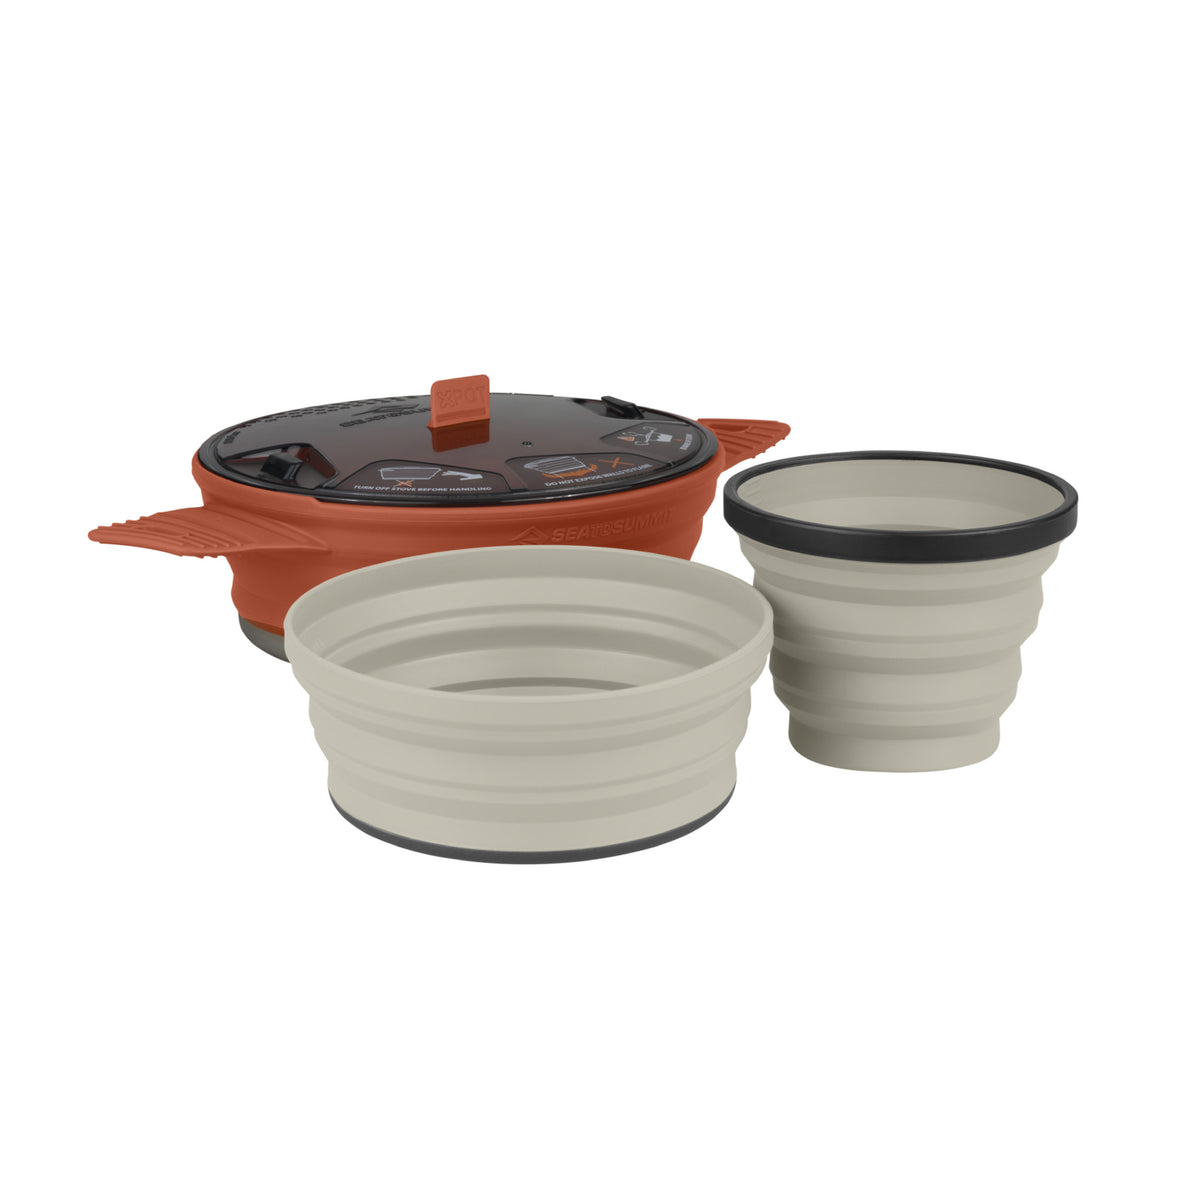 With 21 Pieces Of Nesting Cookware Made Of and similar items